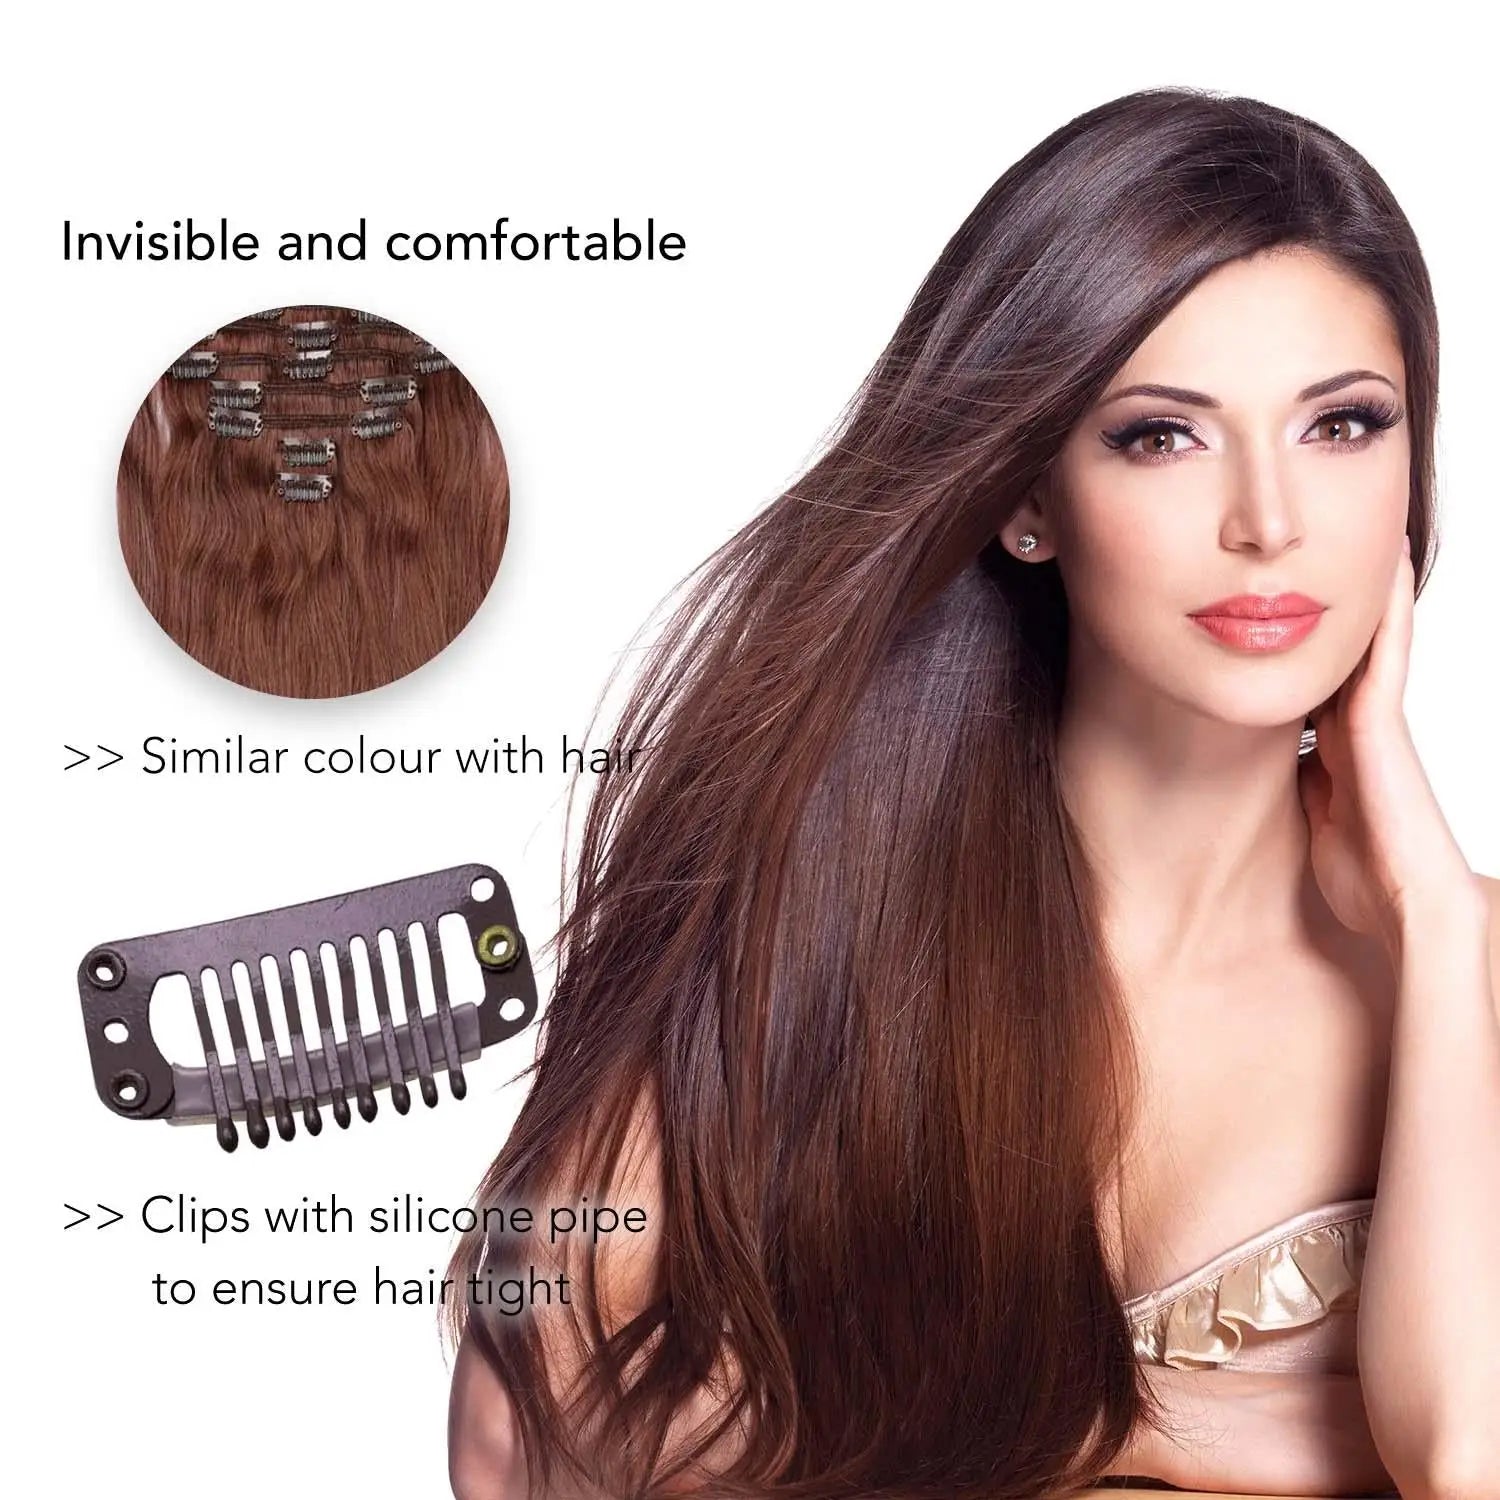 Woman using a metal snap clip on long brown hair